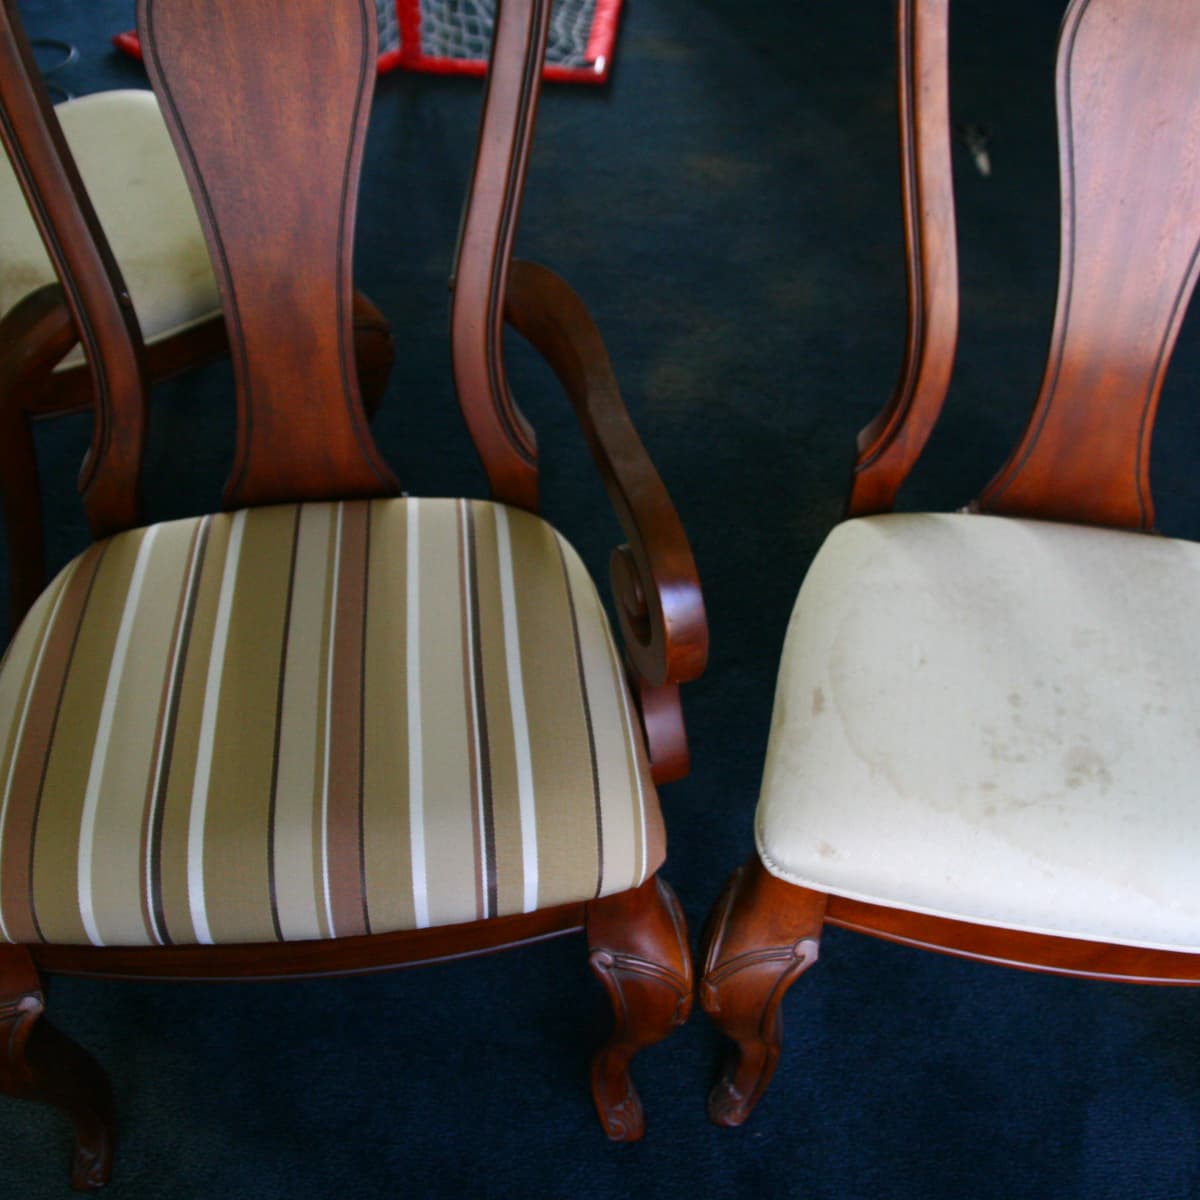 How To Reupholster A Dining Room Chair, How Much Does It Cost To Recover A Dining Chair